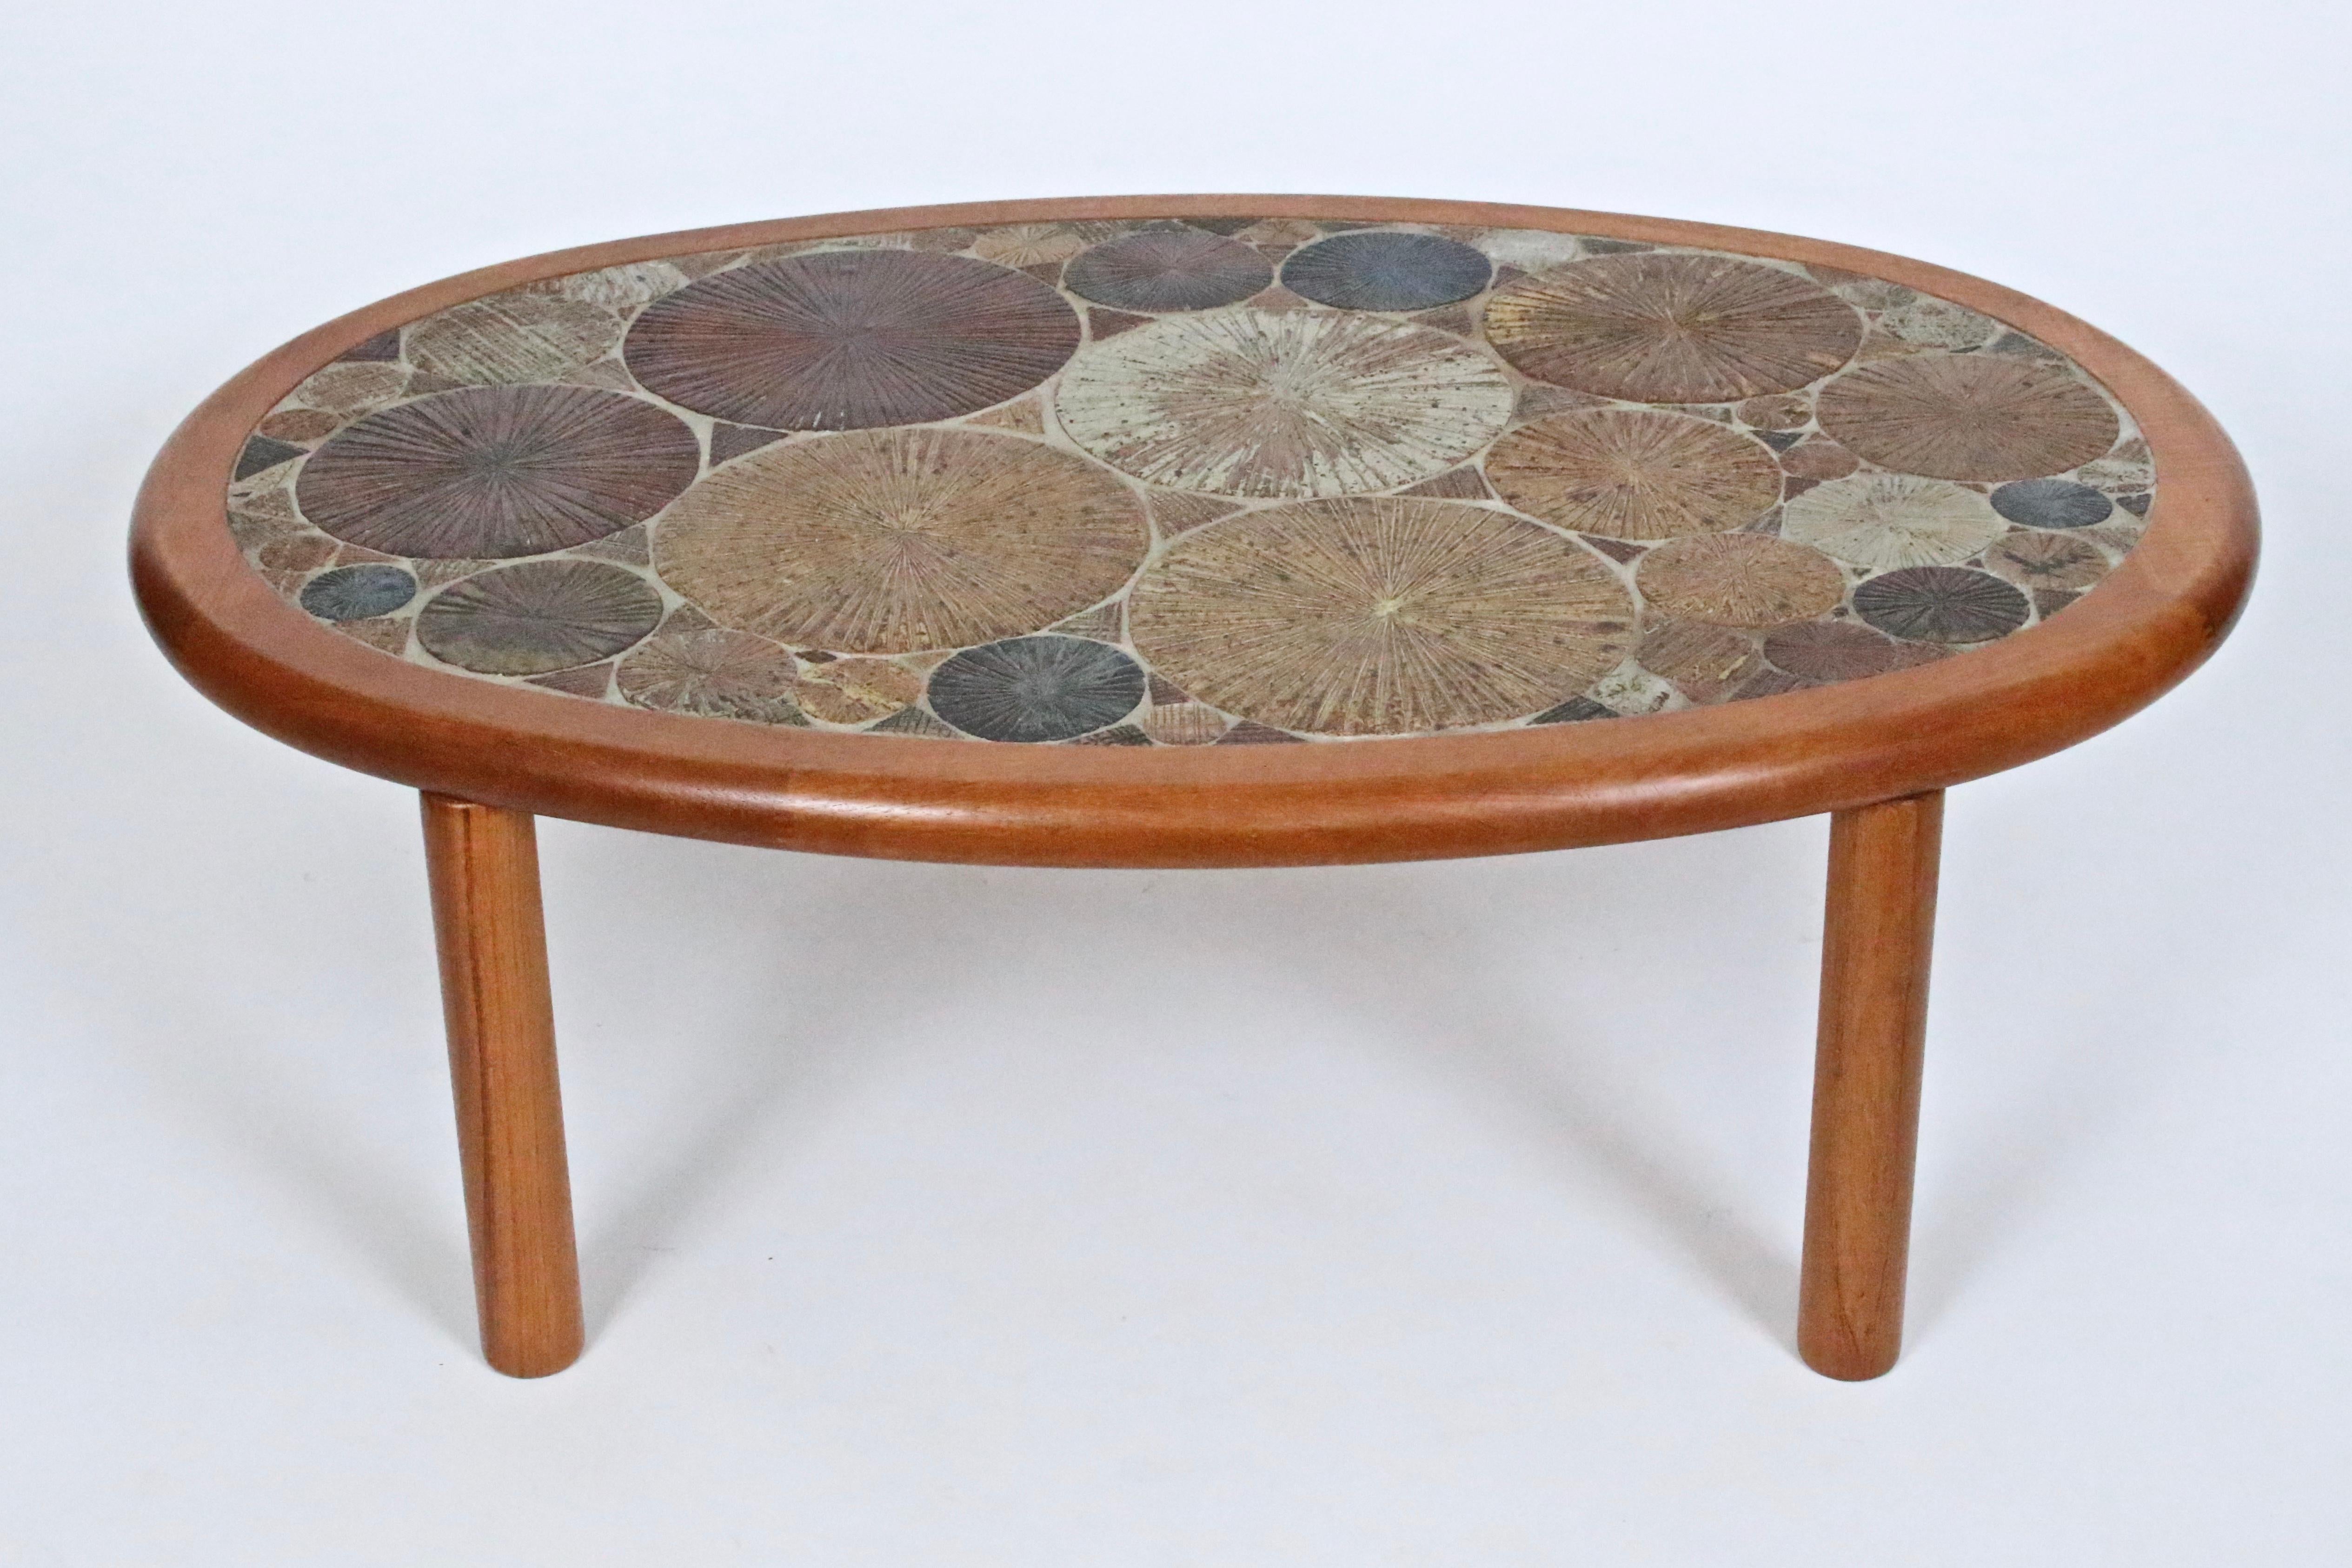 Tue Poulsen Haslev Denmark Oval Teak and Ceramic Art Coffee Table, 1960s 6